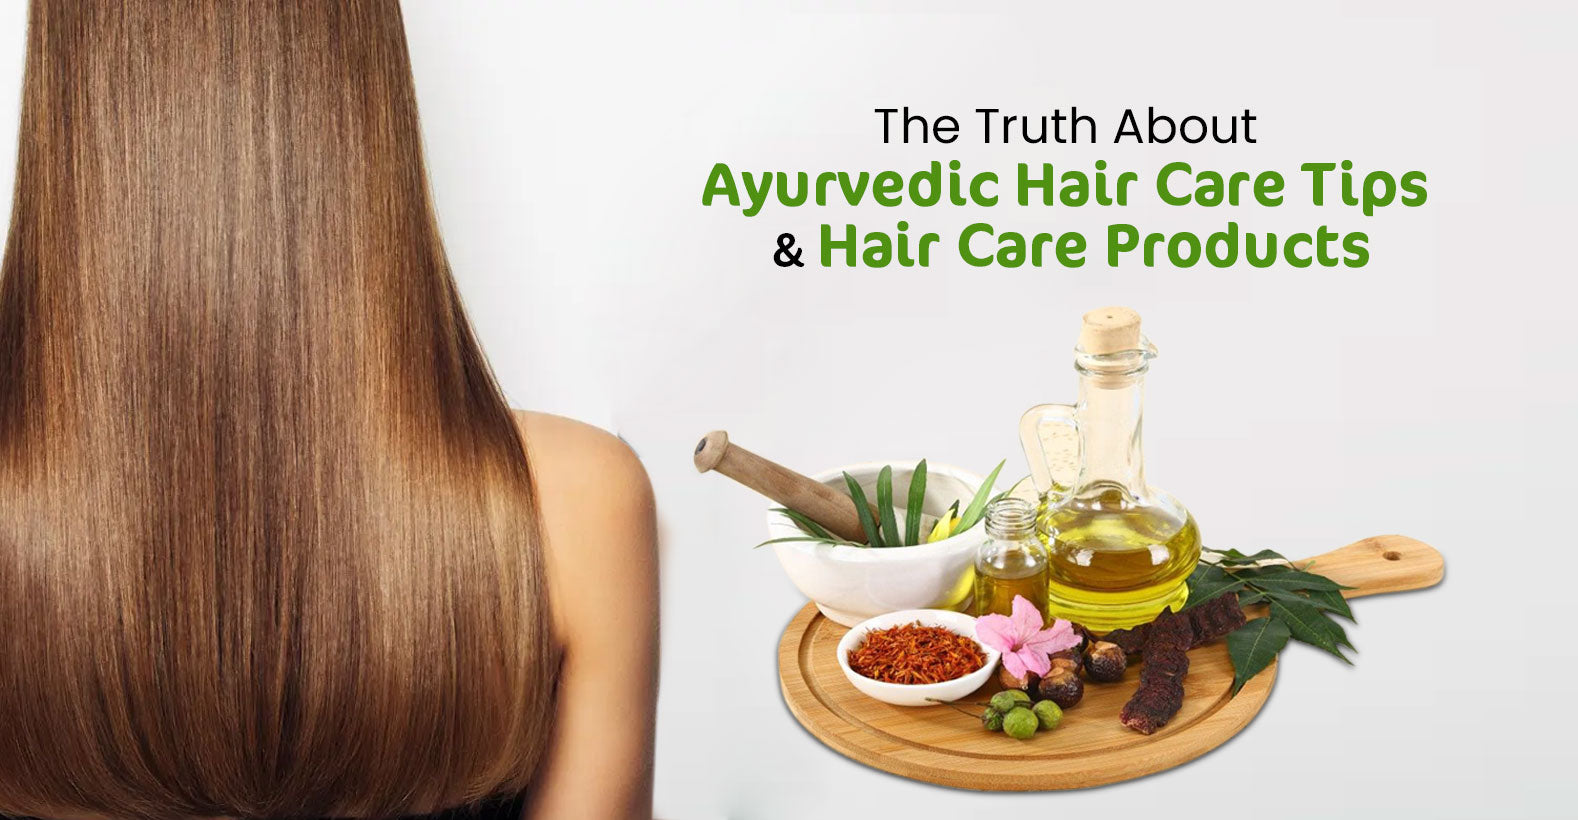 Ayurvedic Hair Care Tips And Hair Care Products For All Hair Types